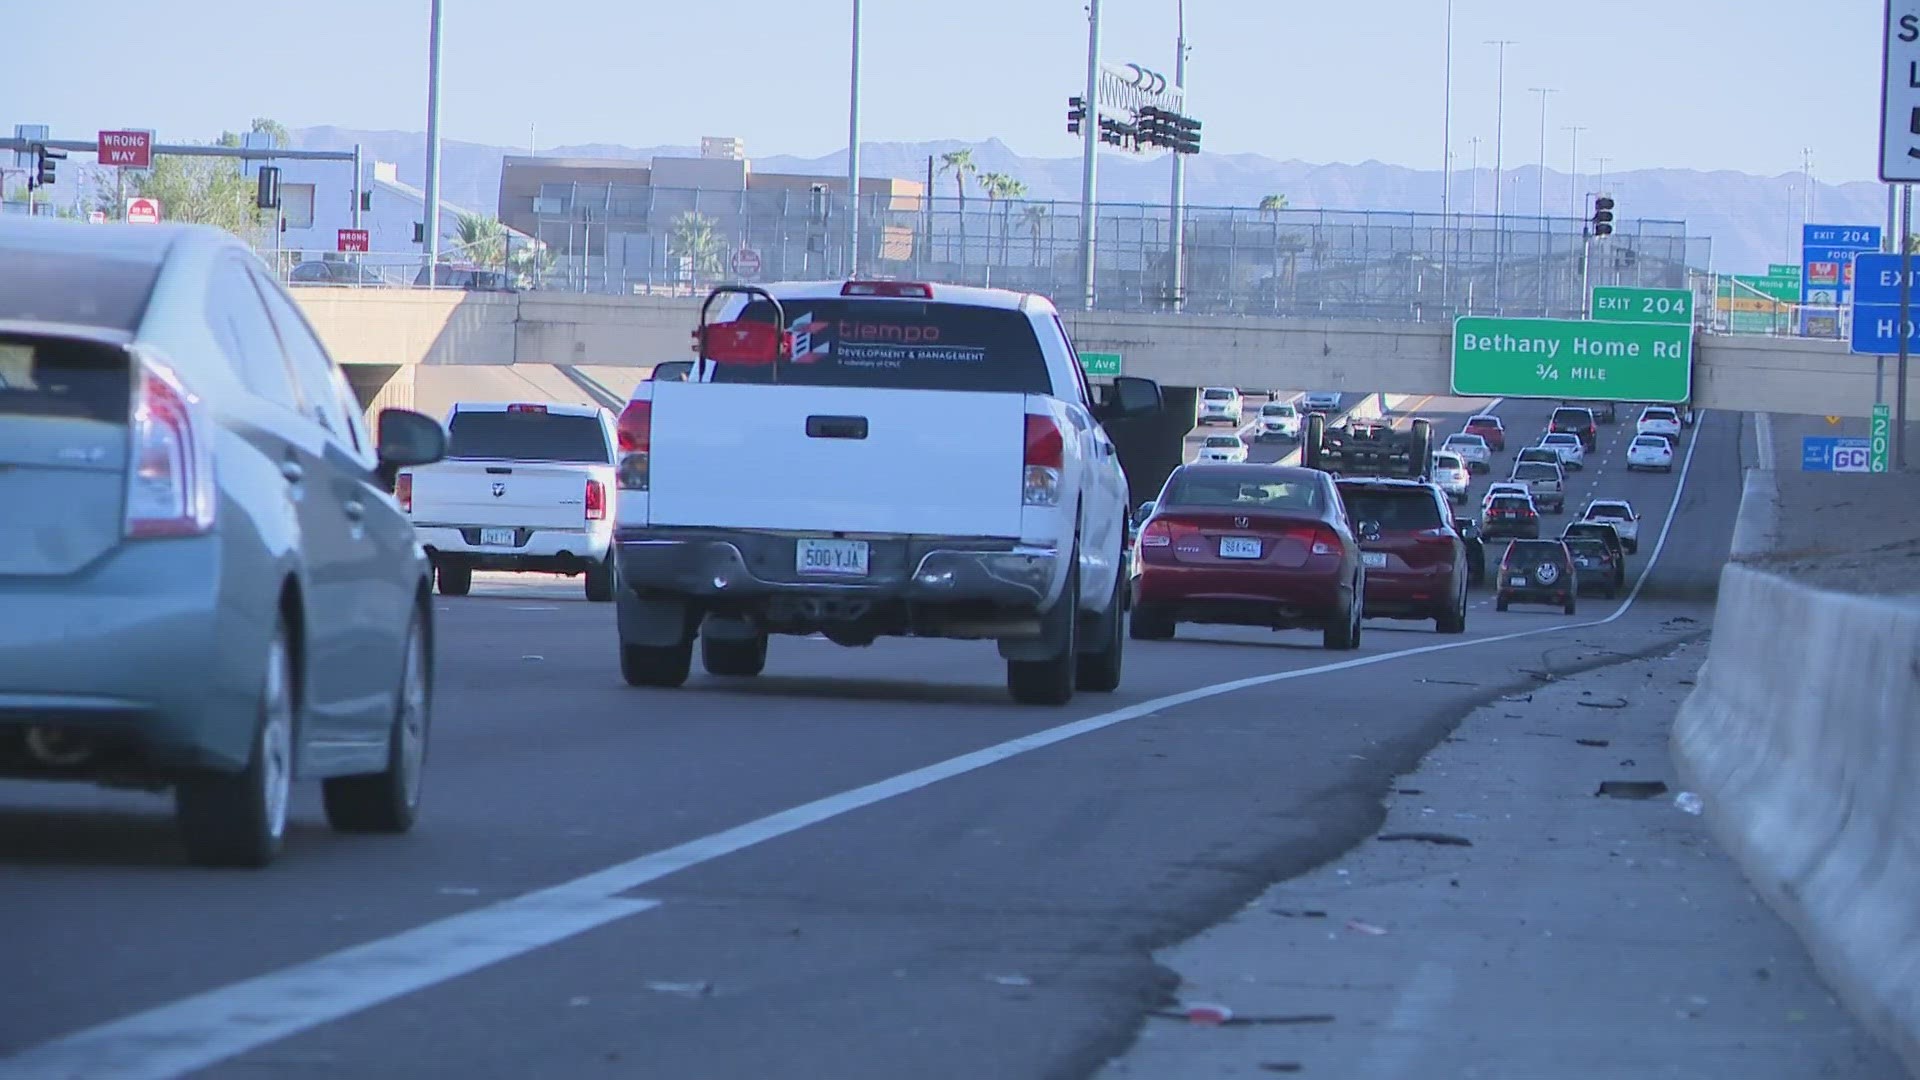 A new law will require any interstate highway to have a posted speed limit at or above 65 mph.